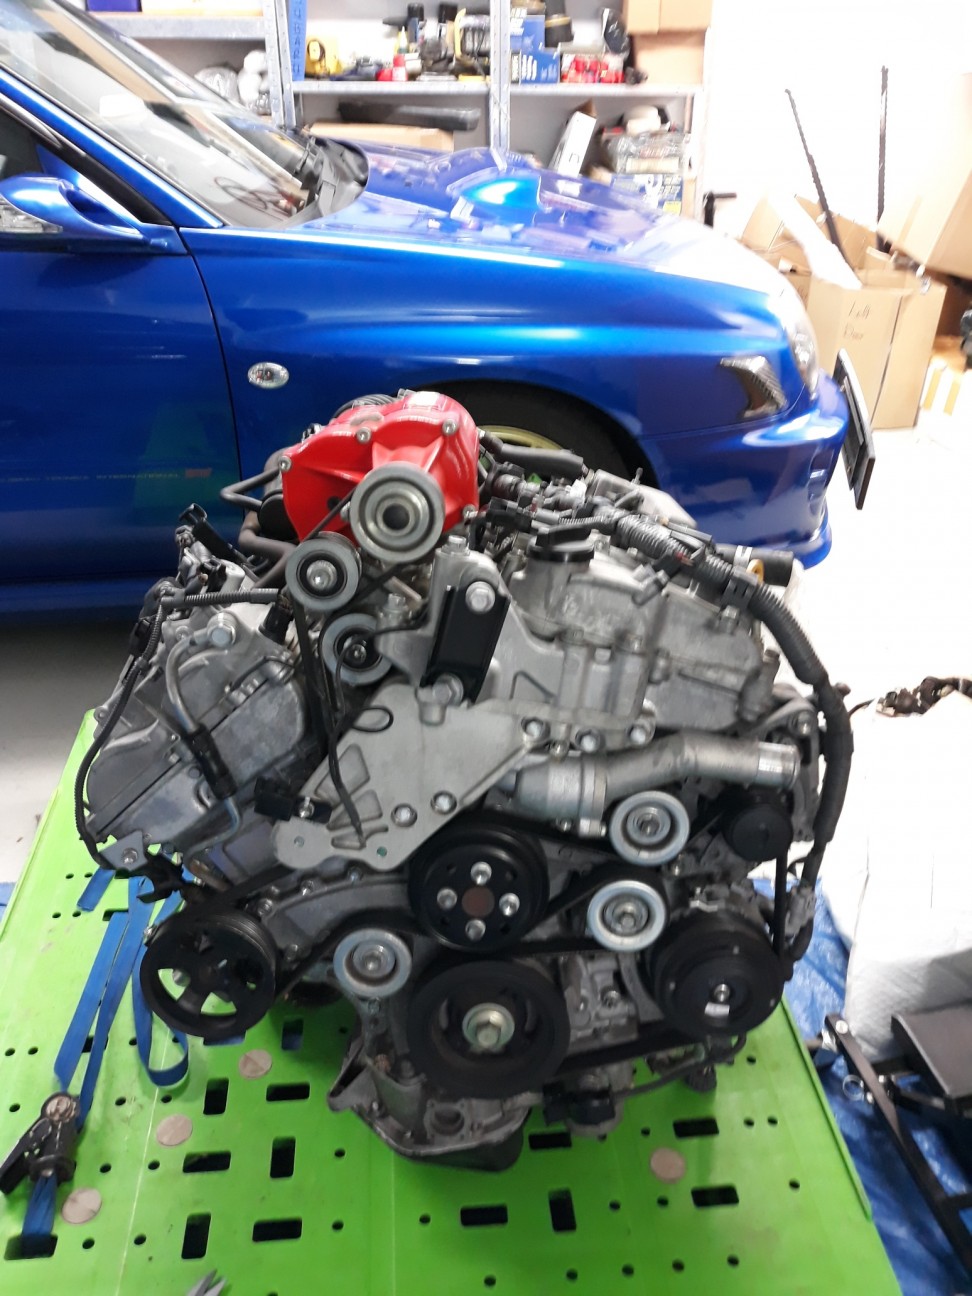 2018Feb25-Front View of Engine.jpg